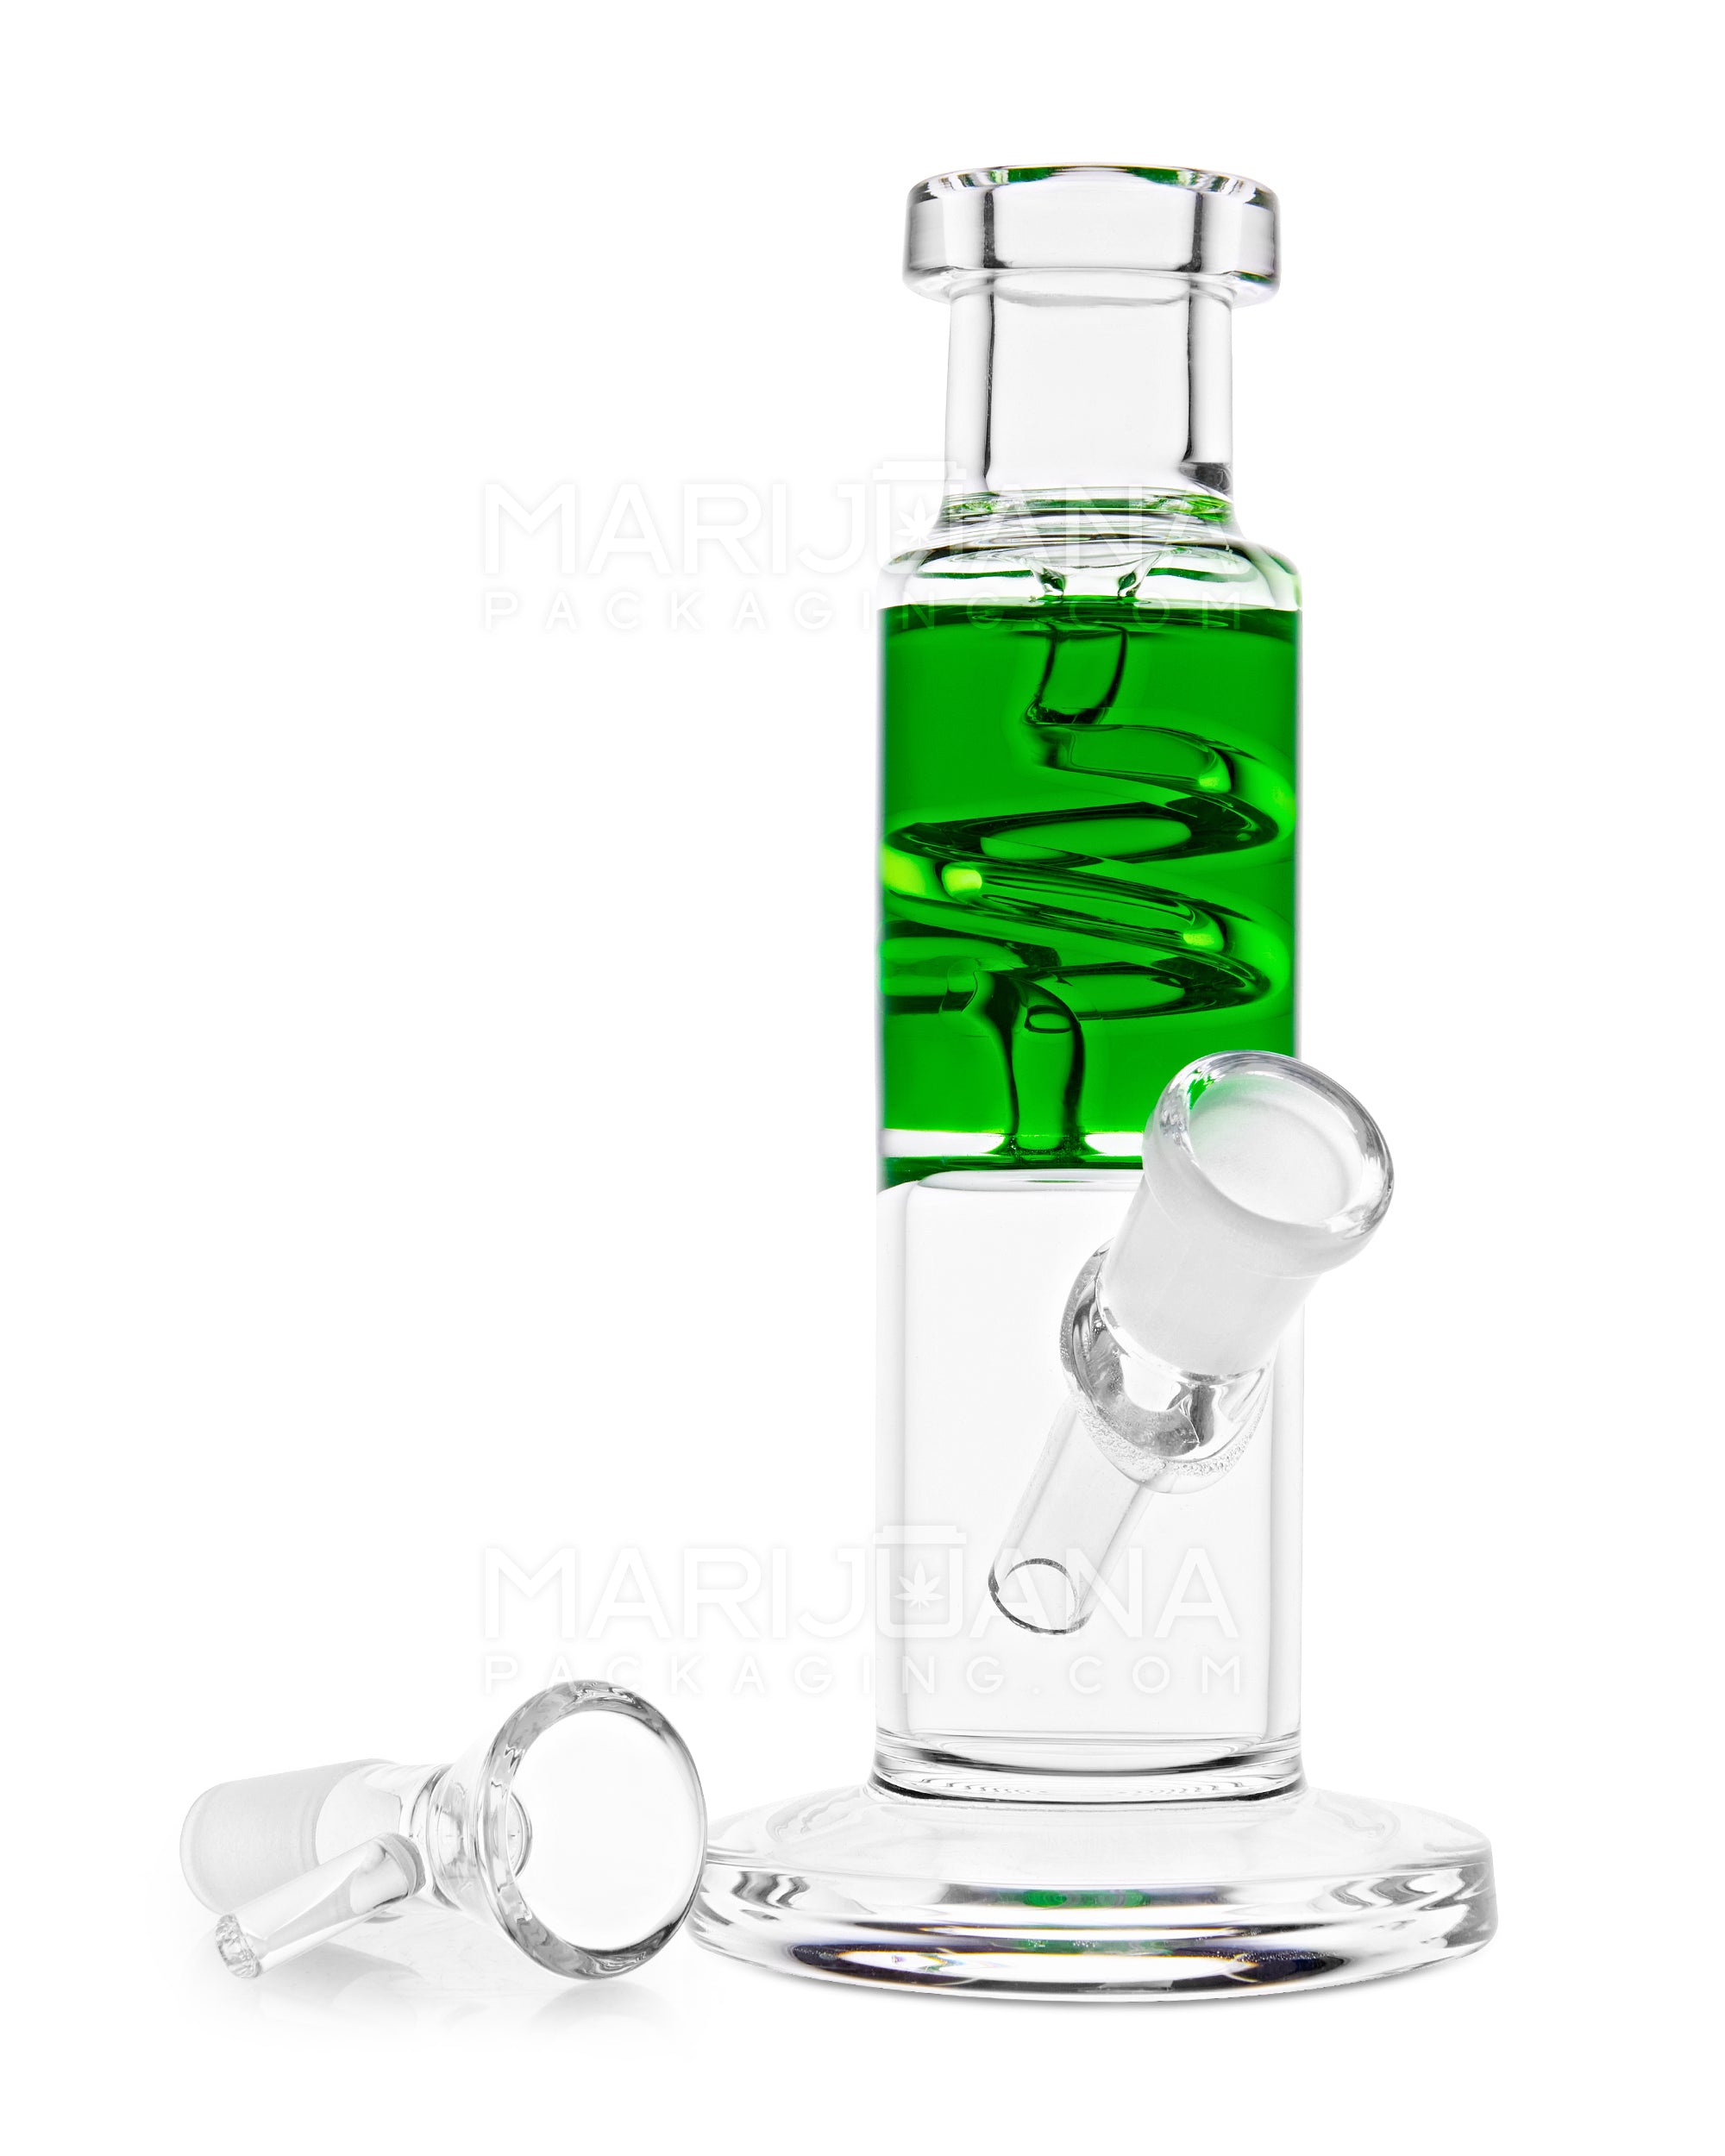 Glycerin Coil Mini Straight Tube Water Pipe | 6in Long - Glass - Green